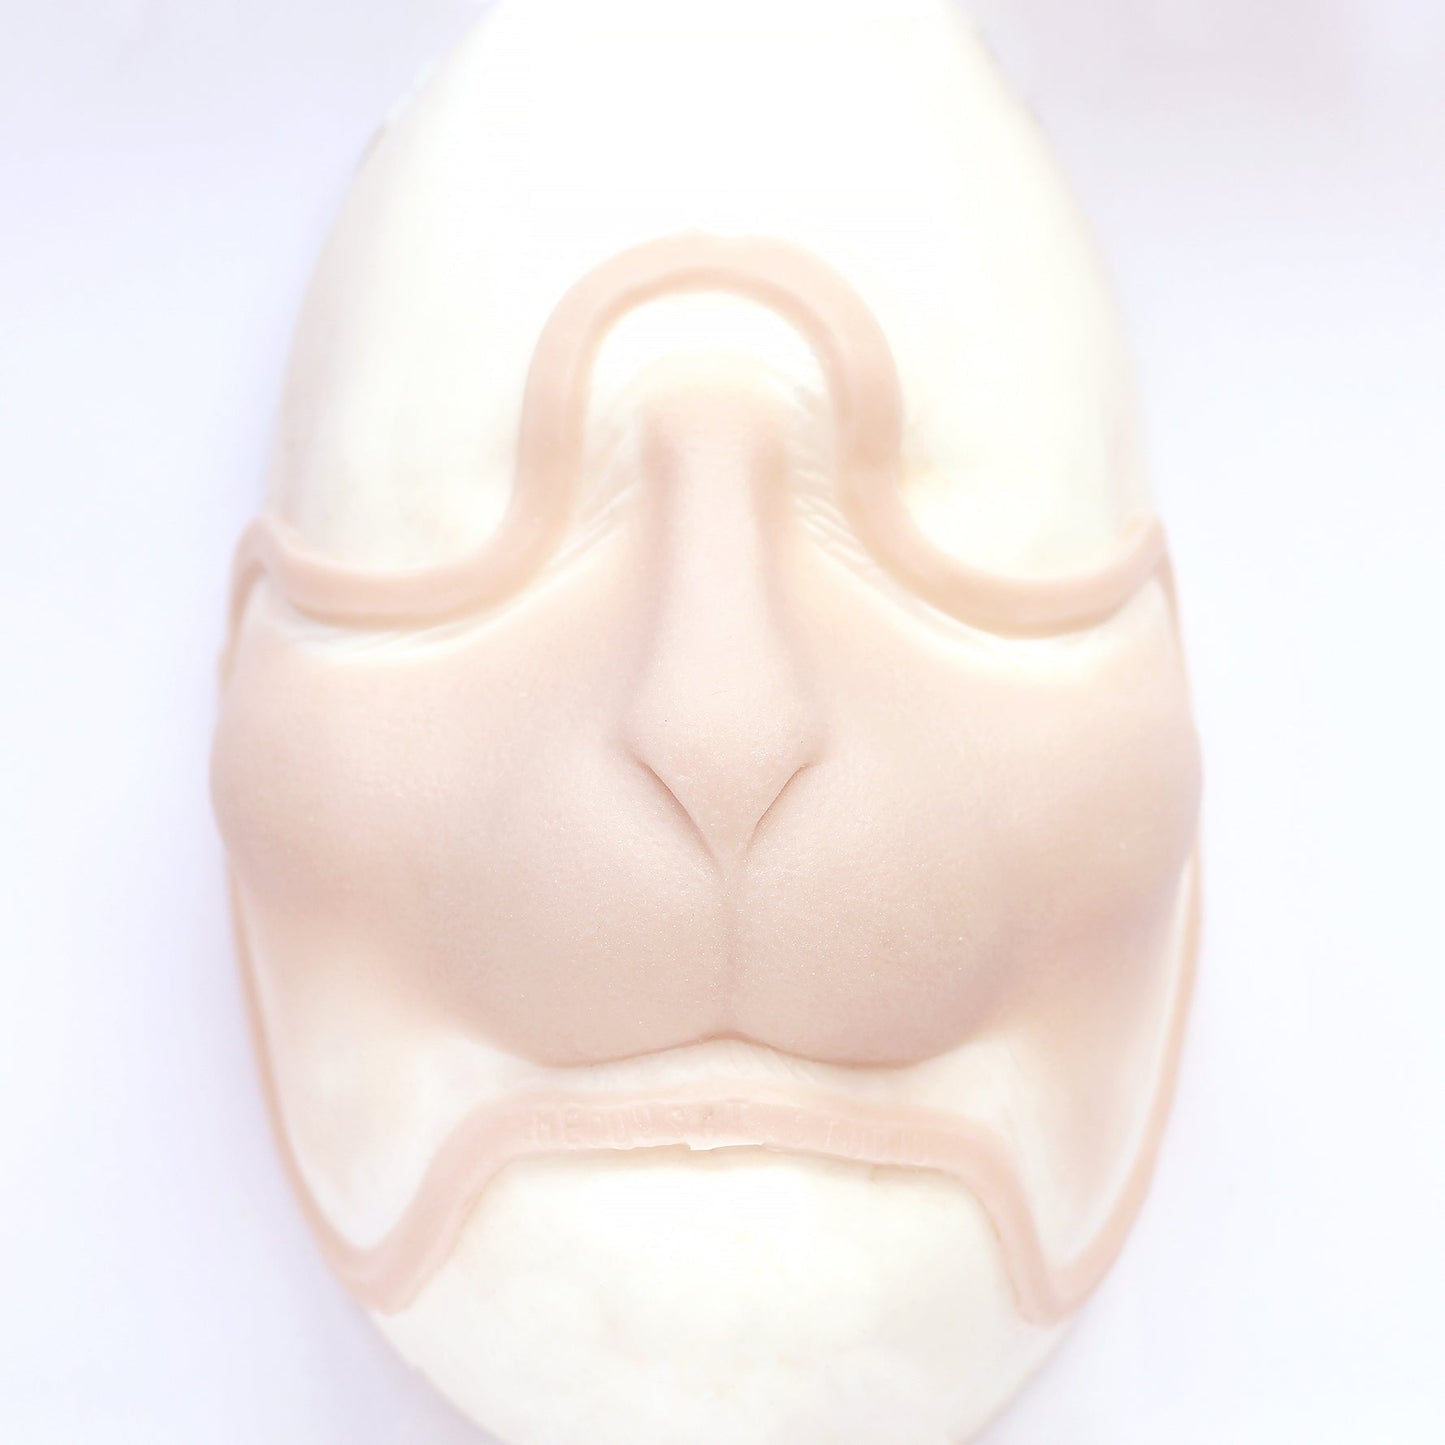 Bunny Nose - Silicone makeup prosthetic in vanilla shade on a white surface